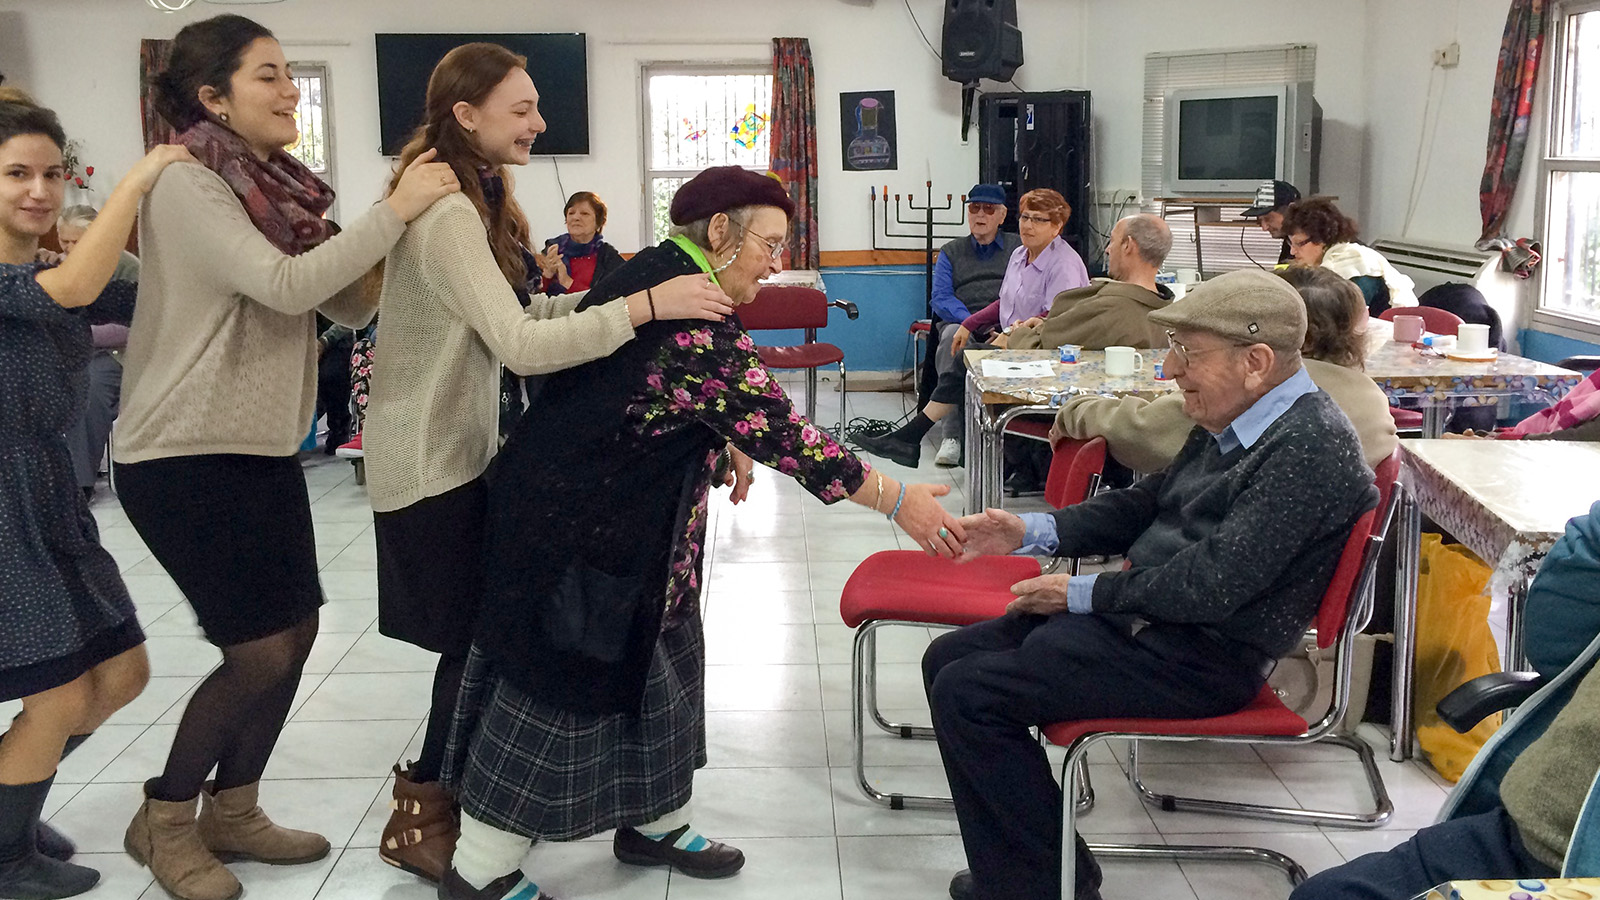 Teenagers volunteering at a retirement home (Photograph: Michal Pu)